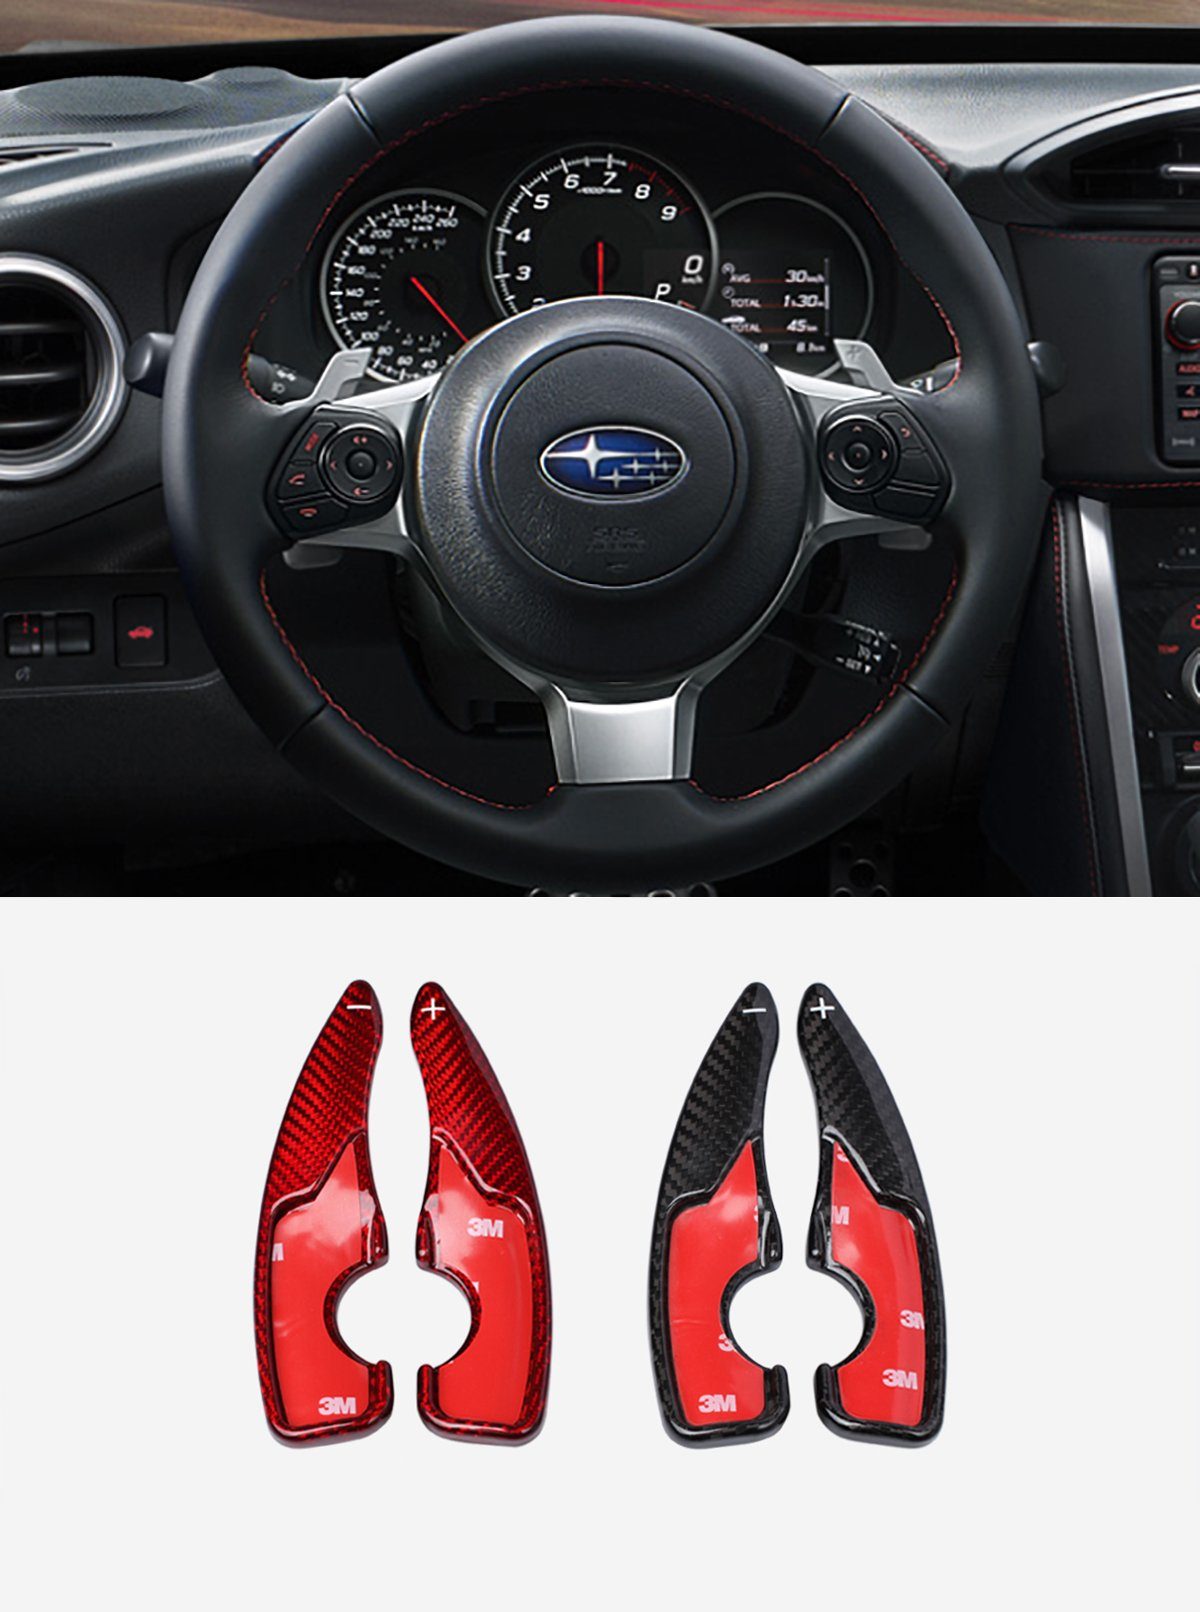 Pinalloy Real Carbon Fiber DSG Paddle Shifter Extensions for Toyota GT86 Subaru BRZ 2017-2019 - Pinalloy Online Auto Accessories Lightweight Car Kit 